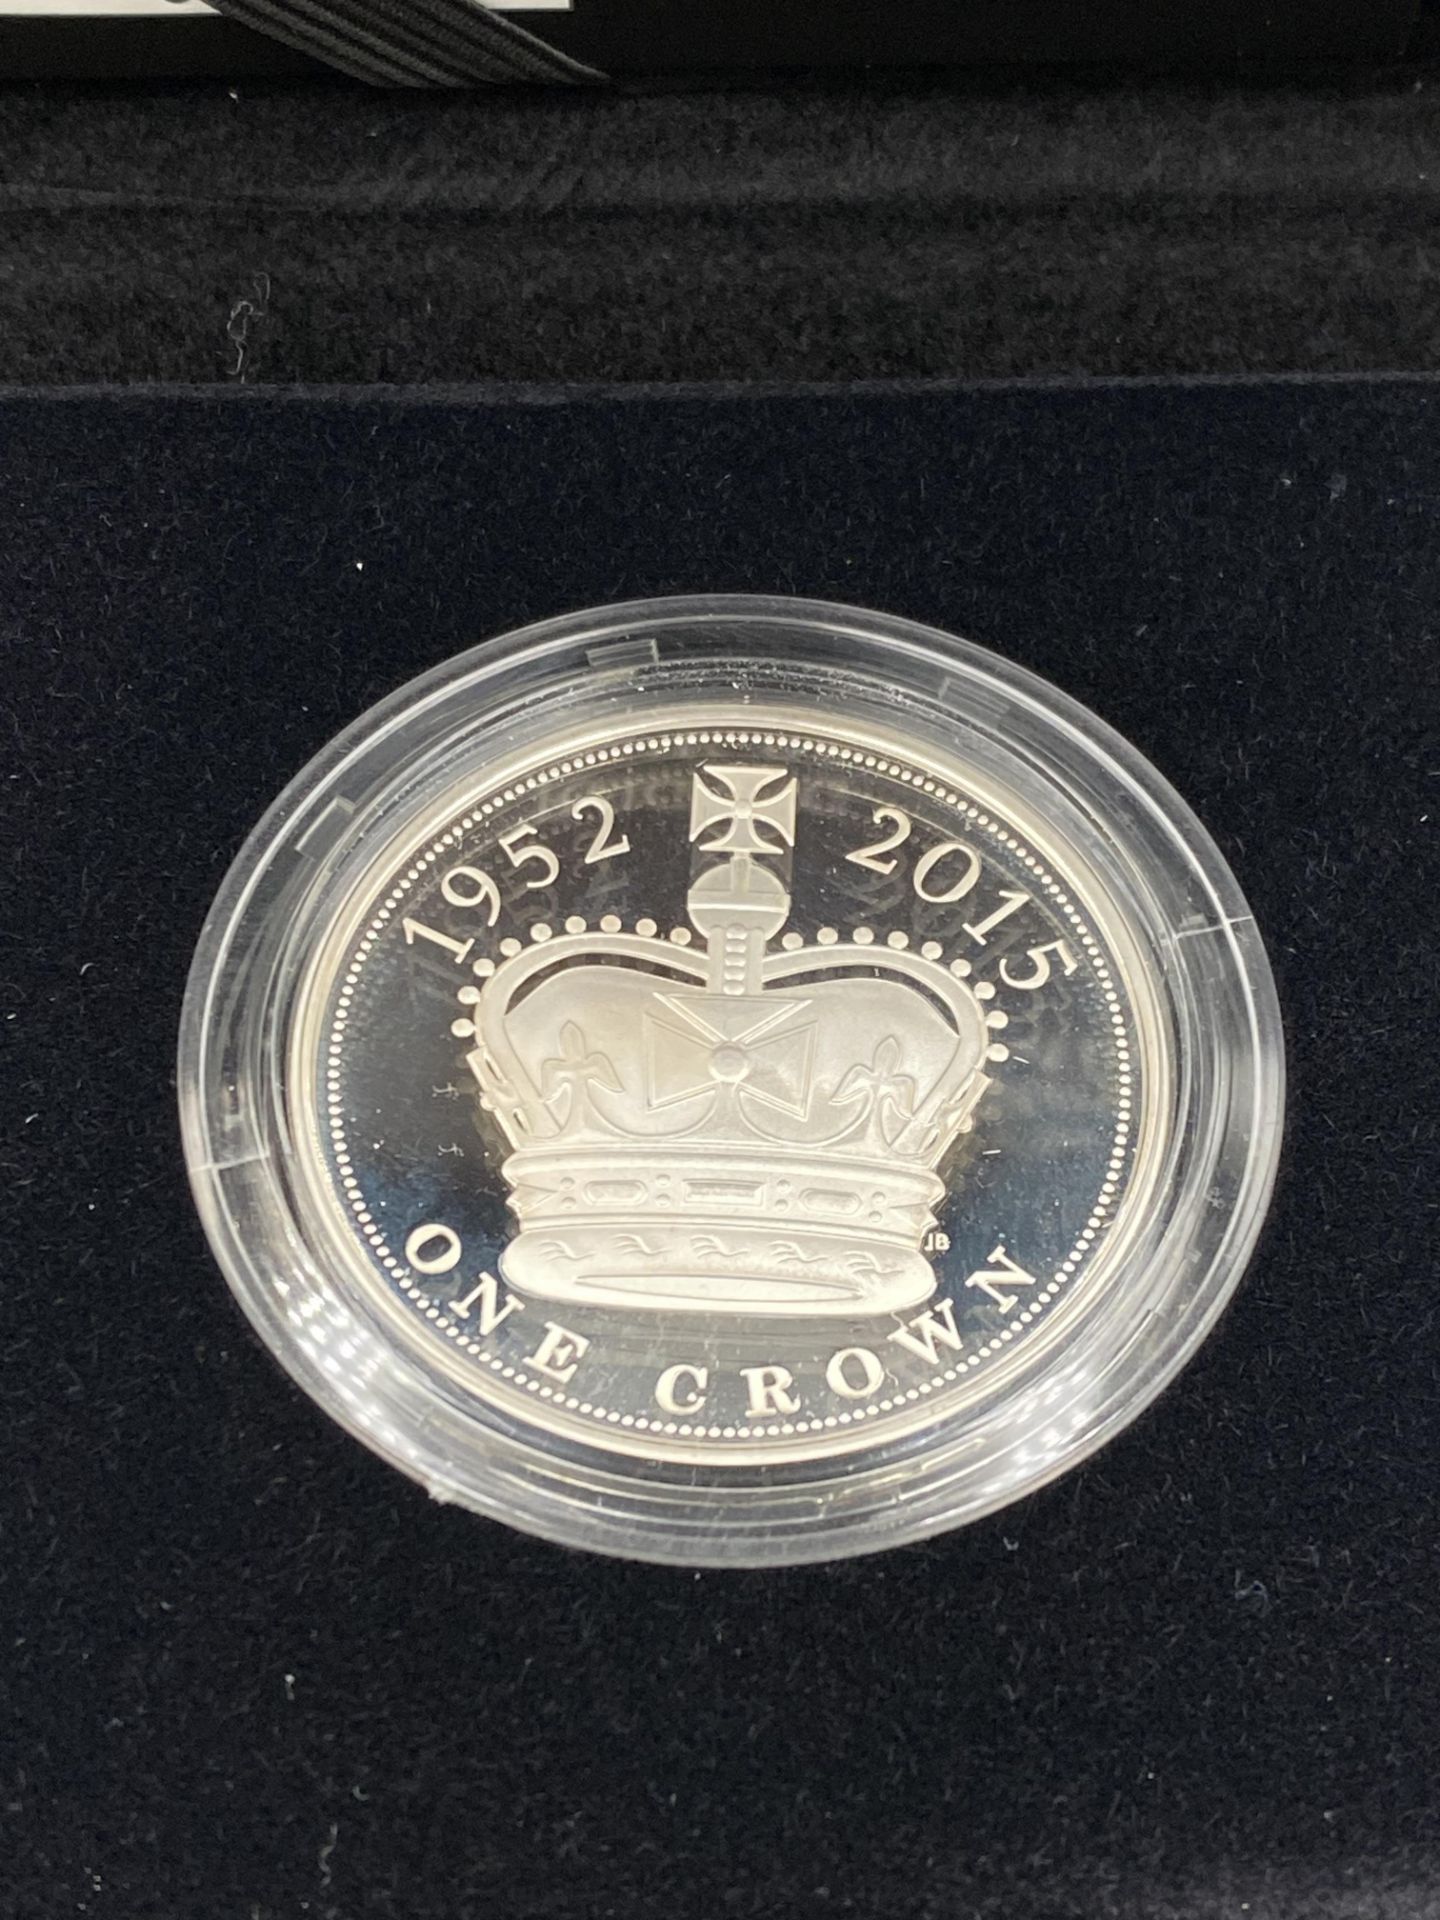 Royal Mint Longest Reigning Monarch 2015 silver £5 coin - Image 2 of 4